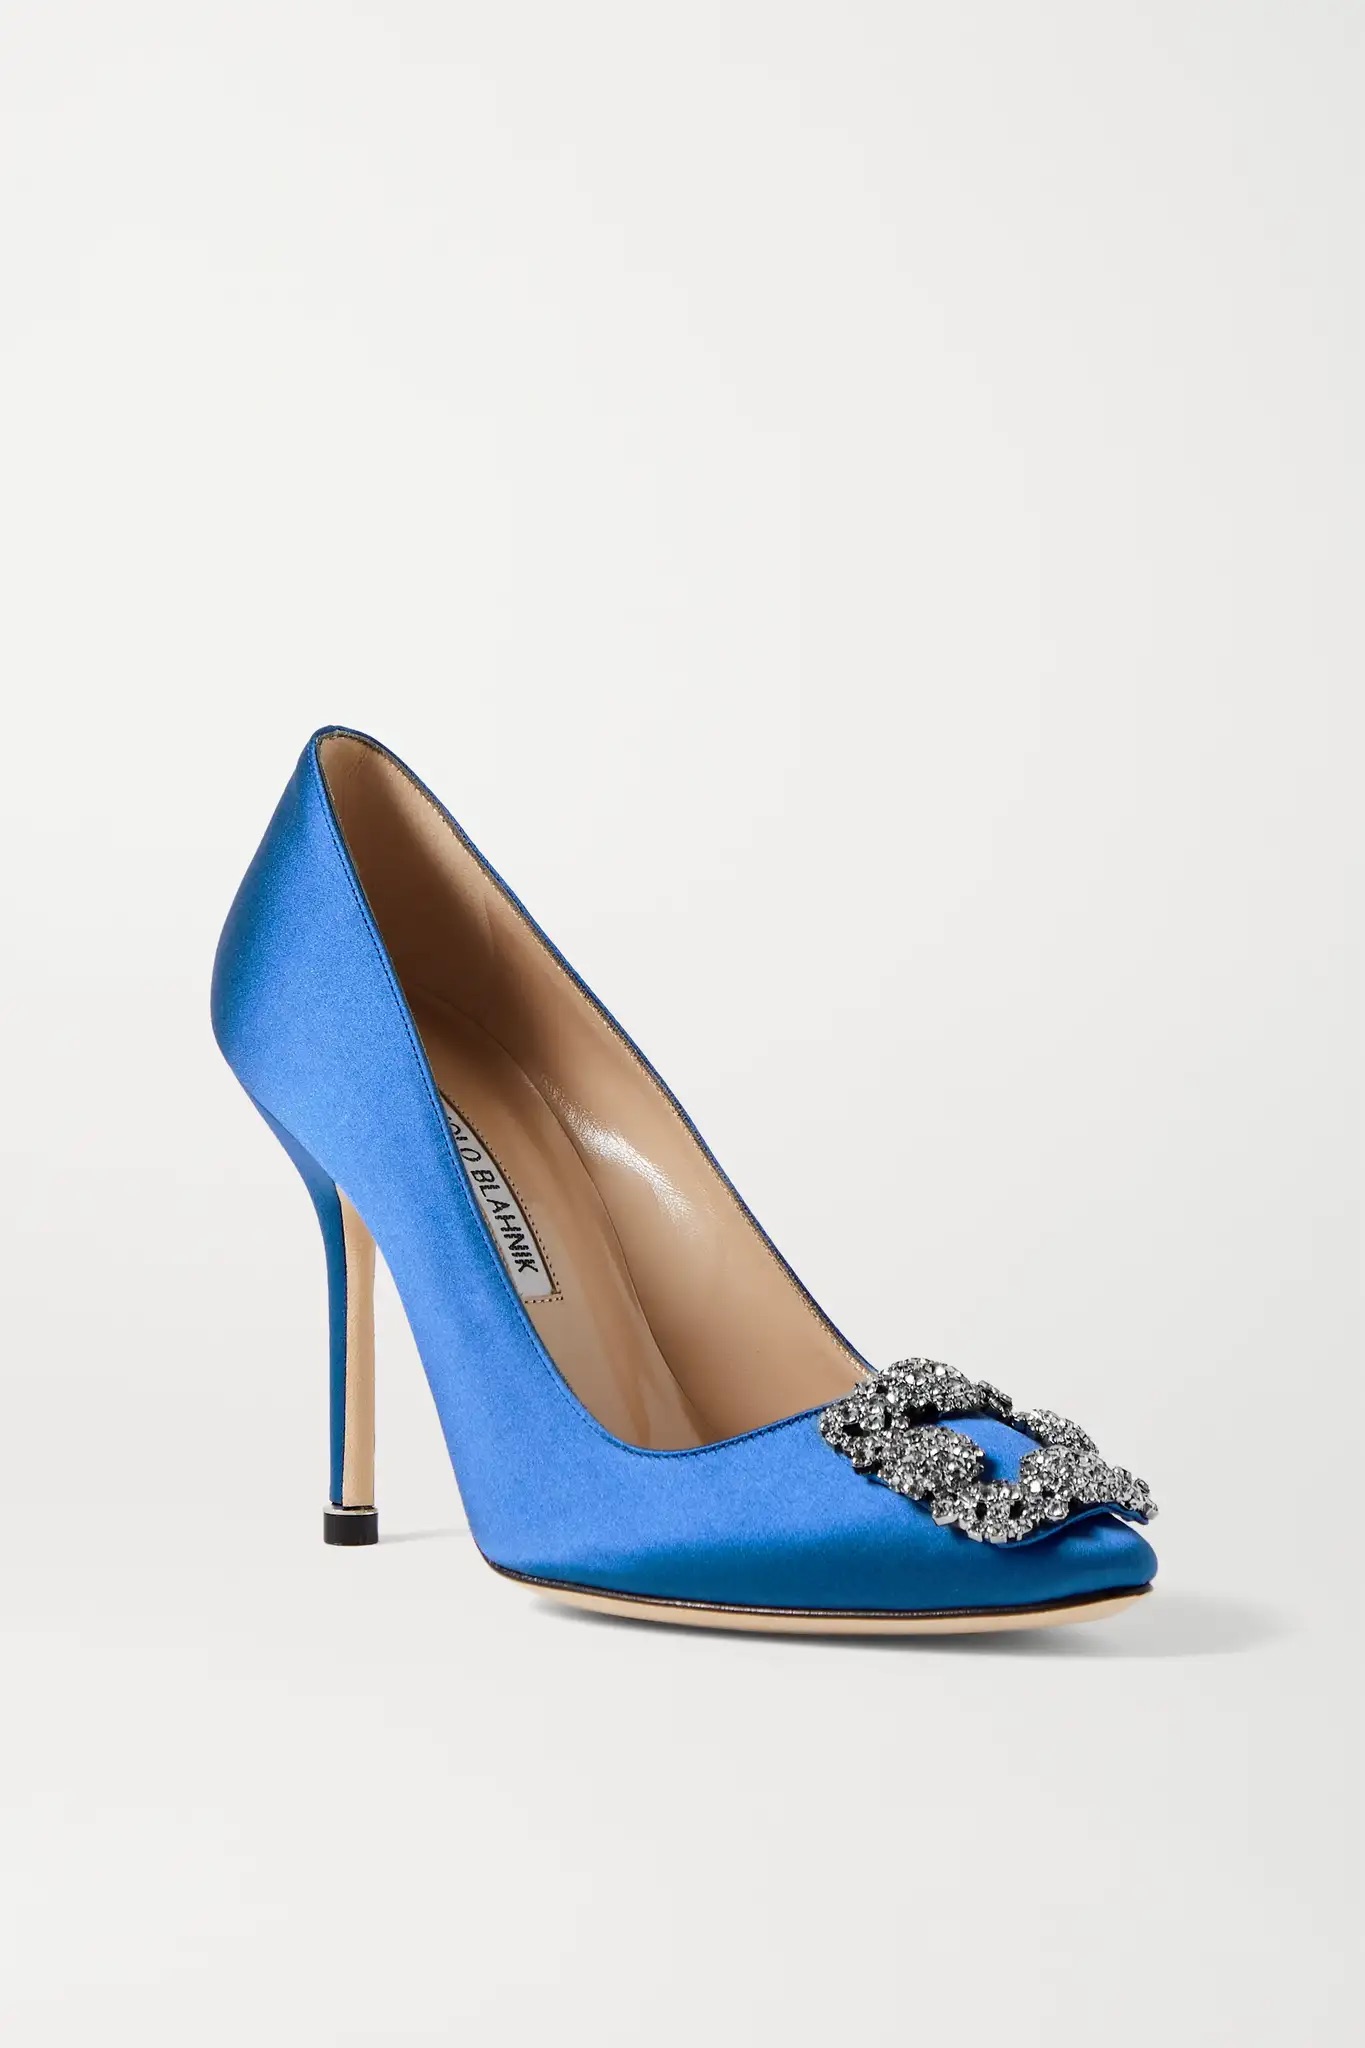 The 7 Best Manolo Blahnik Shoes to Invest In | Who What Wear UK